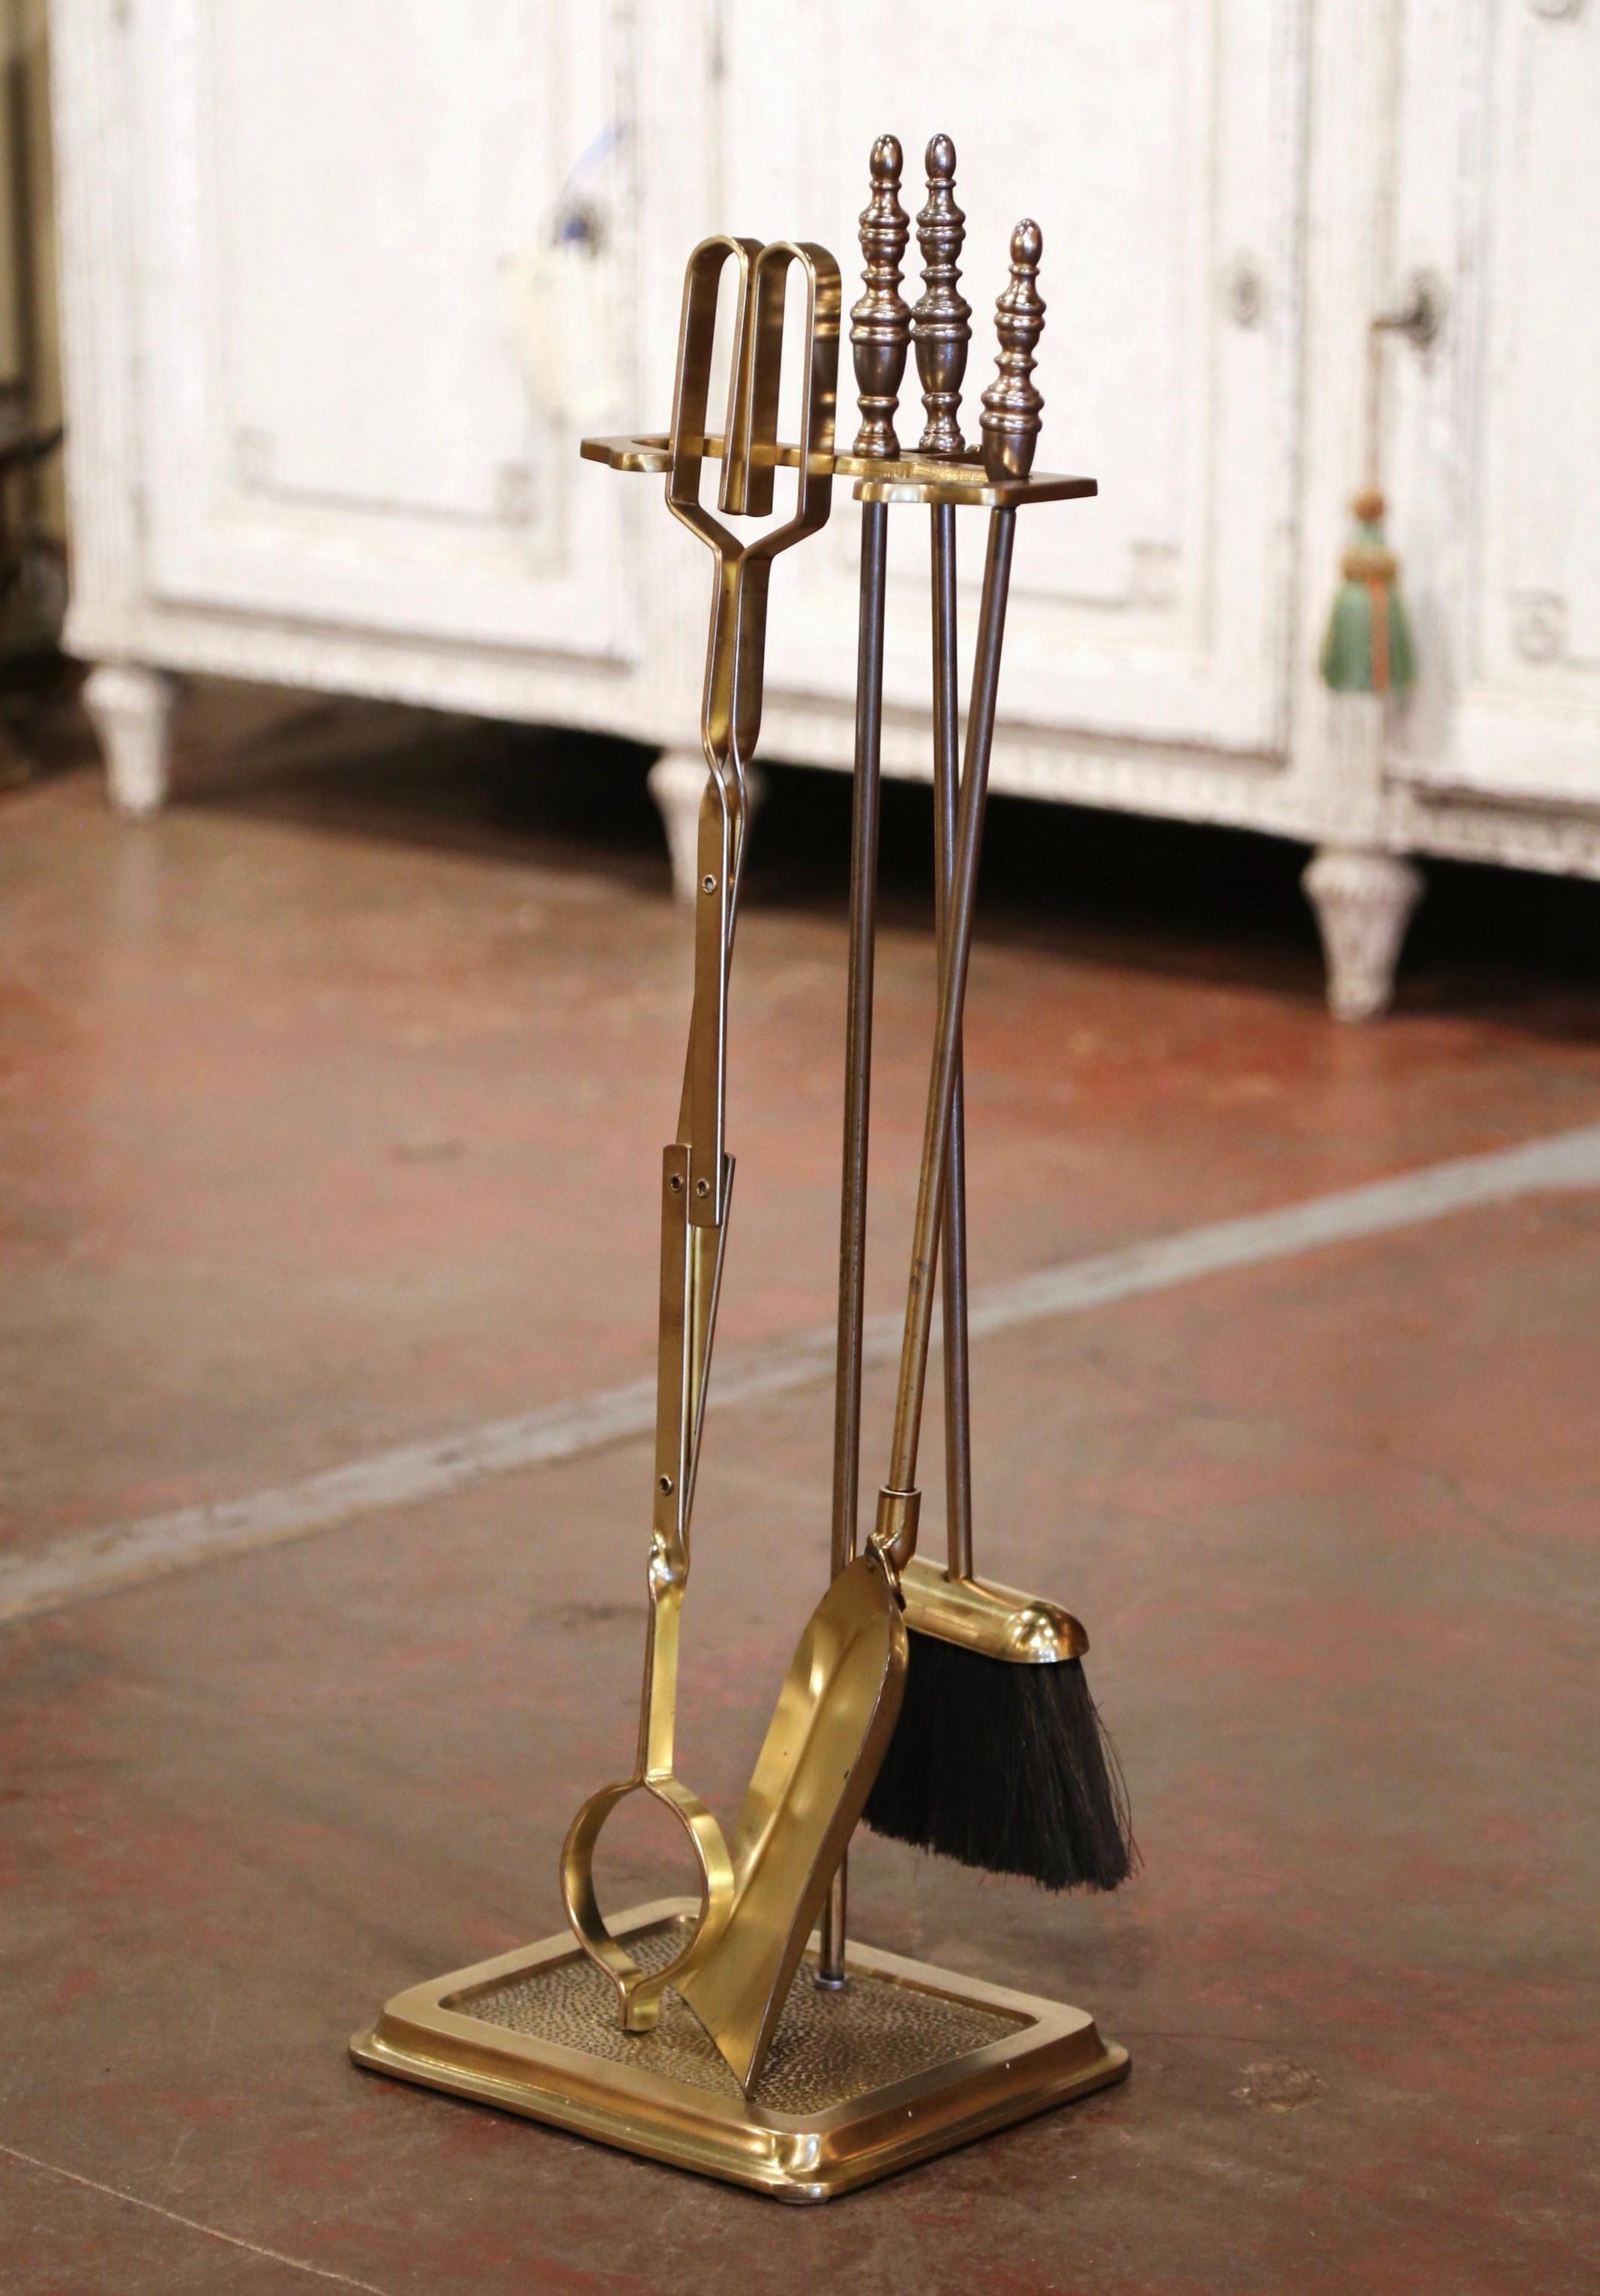 Place this elegant fireplace tool set next to your mantel. Crafted in France circa 1960, the brass Rococo 